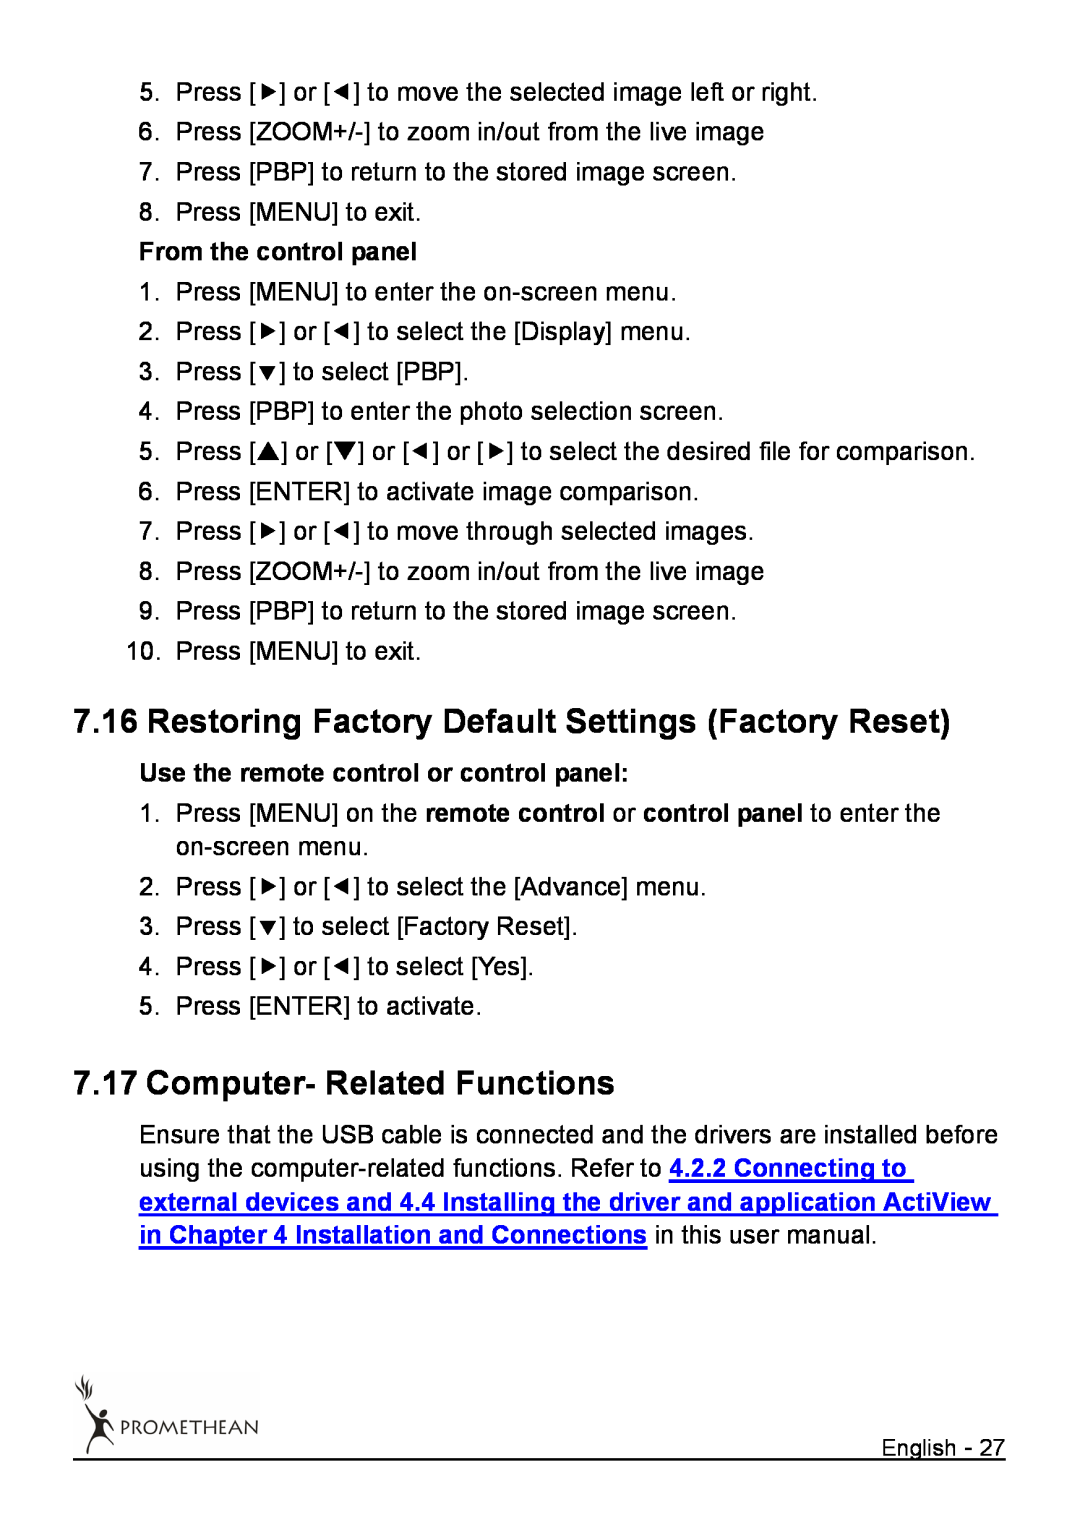 Promethean 322 user manual 7.17Computer- Related Functions, From the control panel, Use the remote control or control panel 